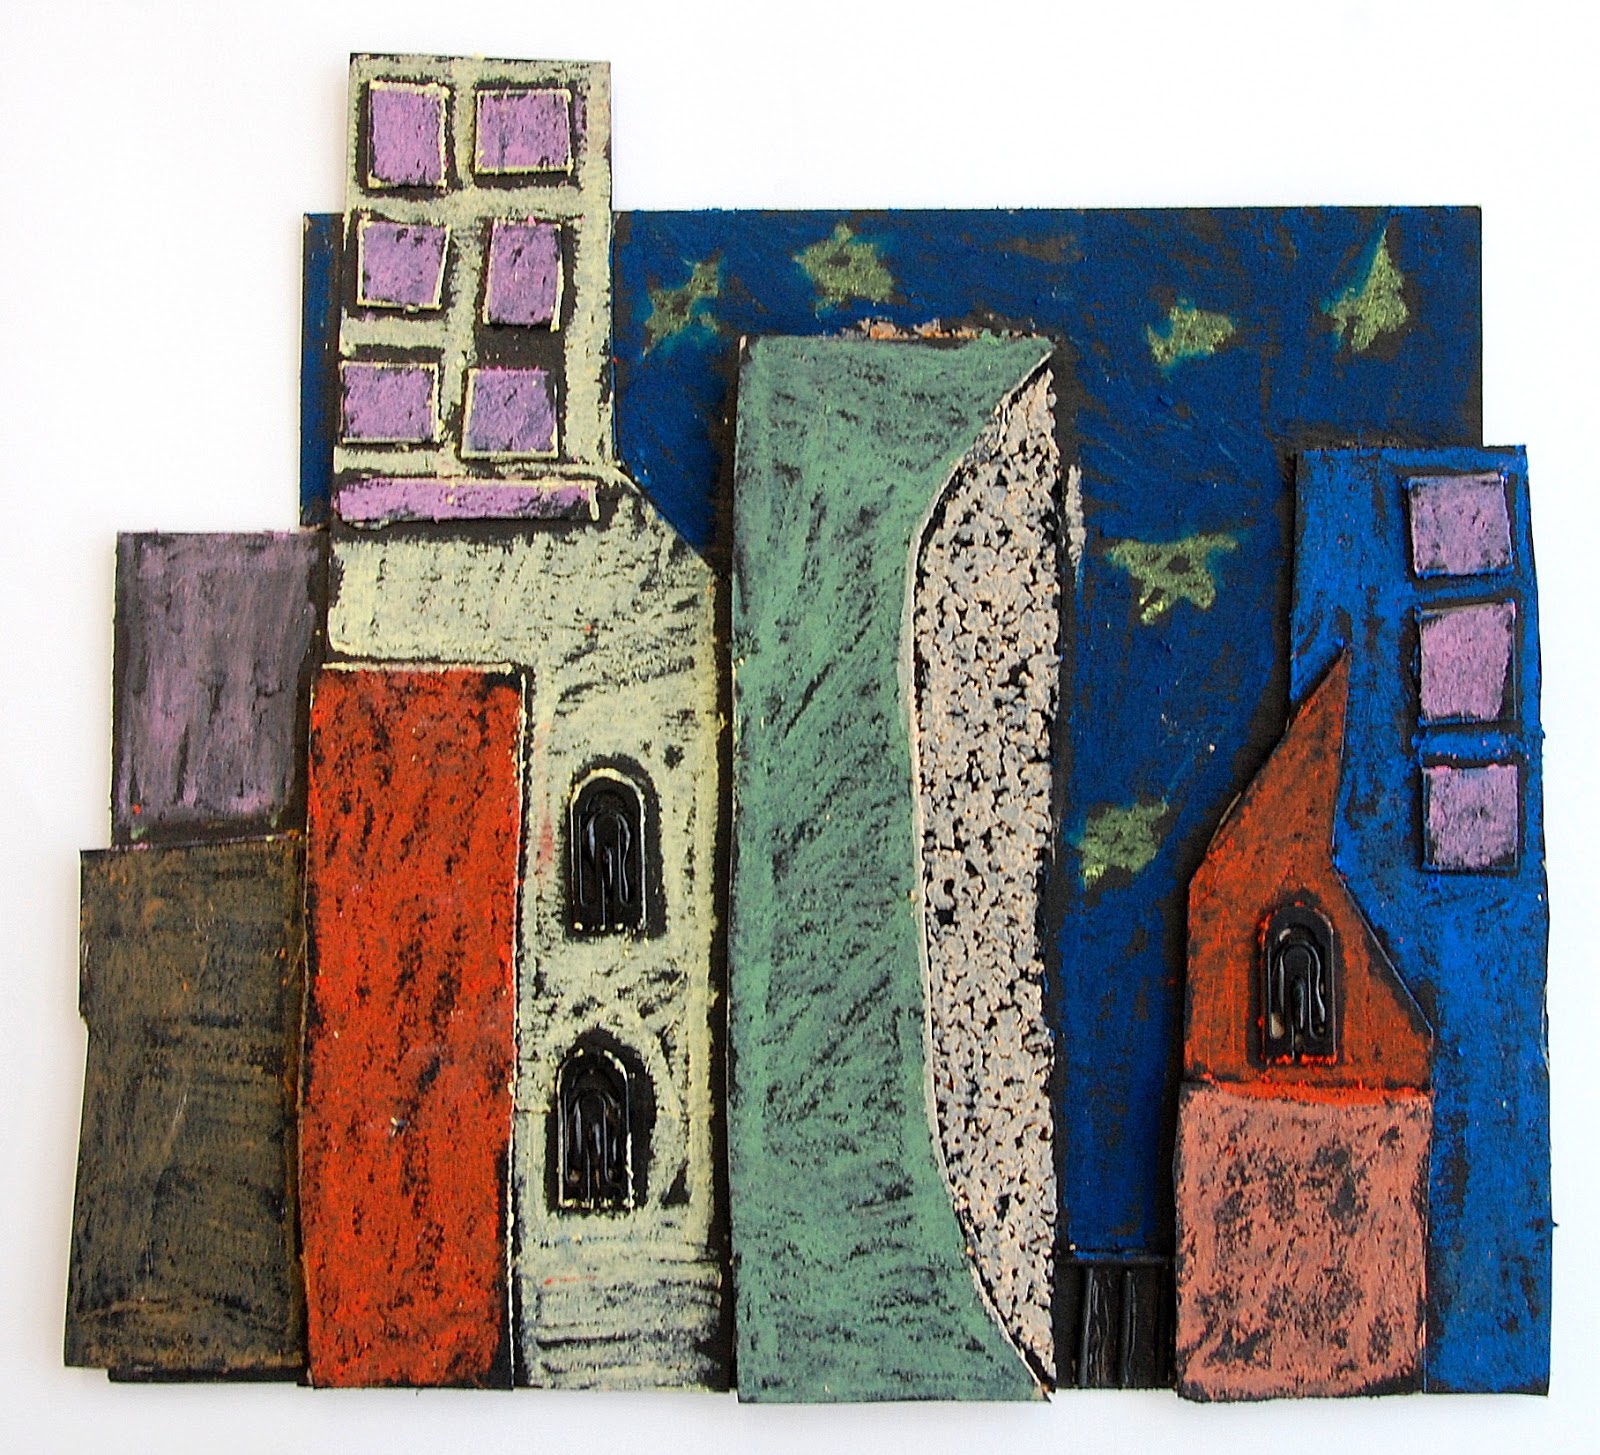 The New Hope Art Gallery: Middle School Art: Mixed Media Cityscapes